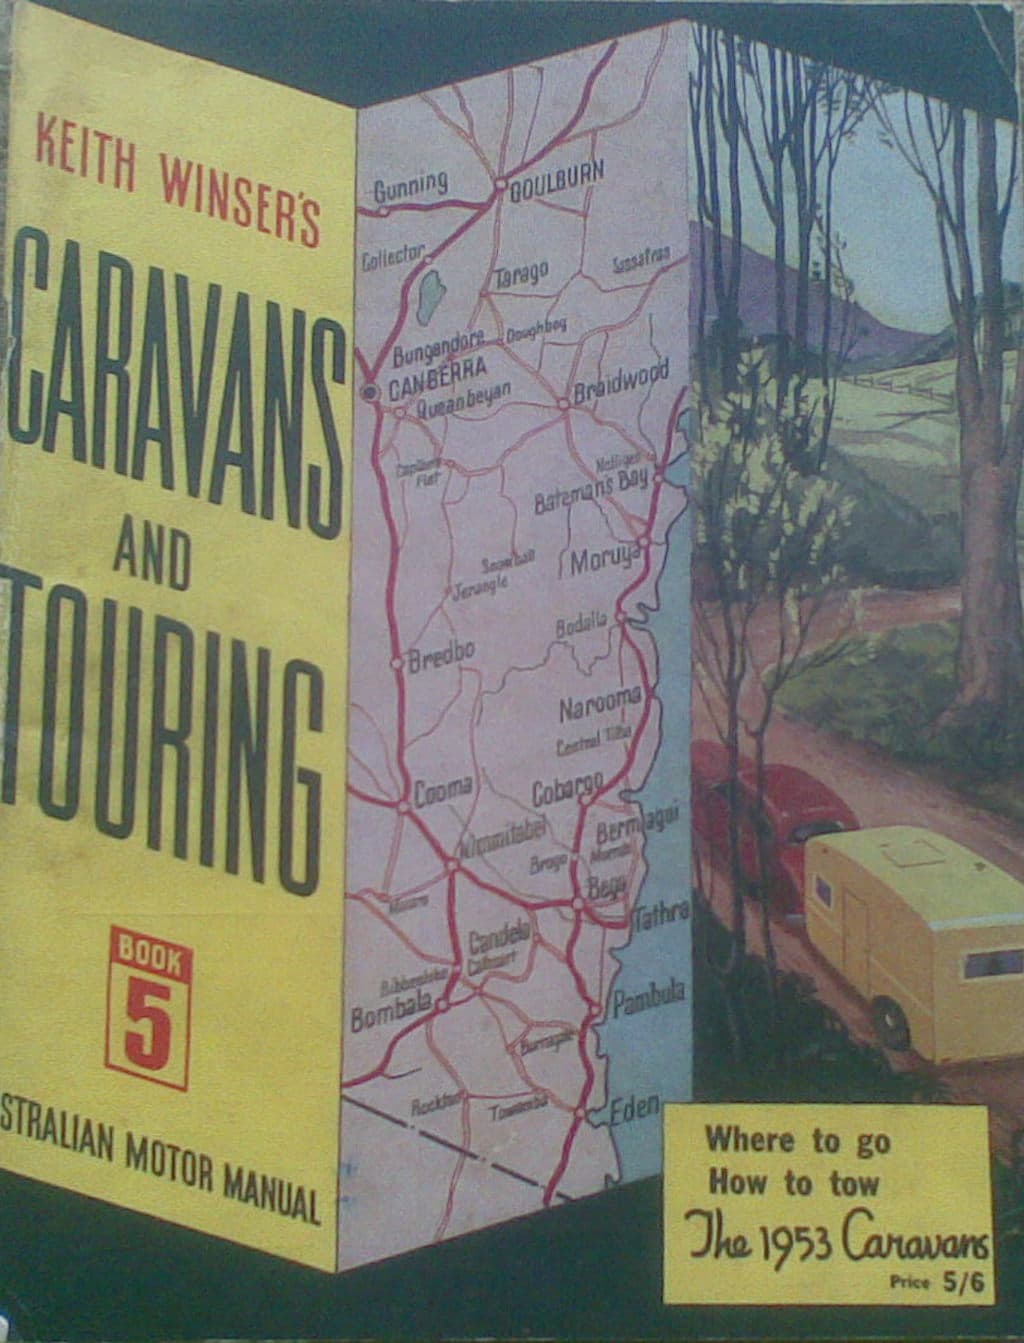 Book 9 Keith Winser's Caravans and Touring 1957